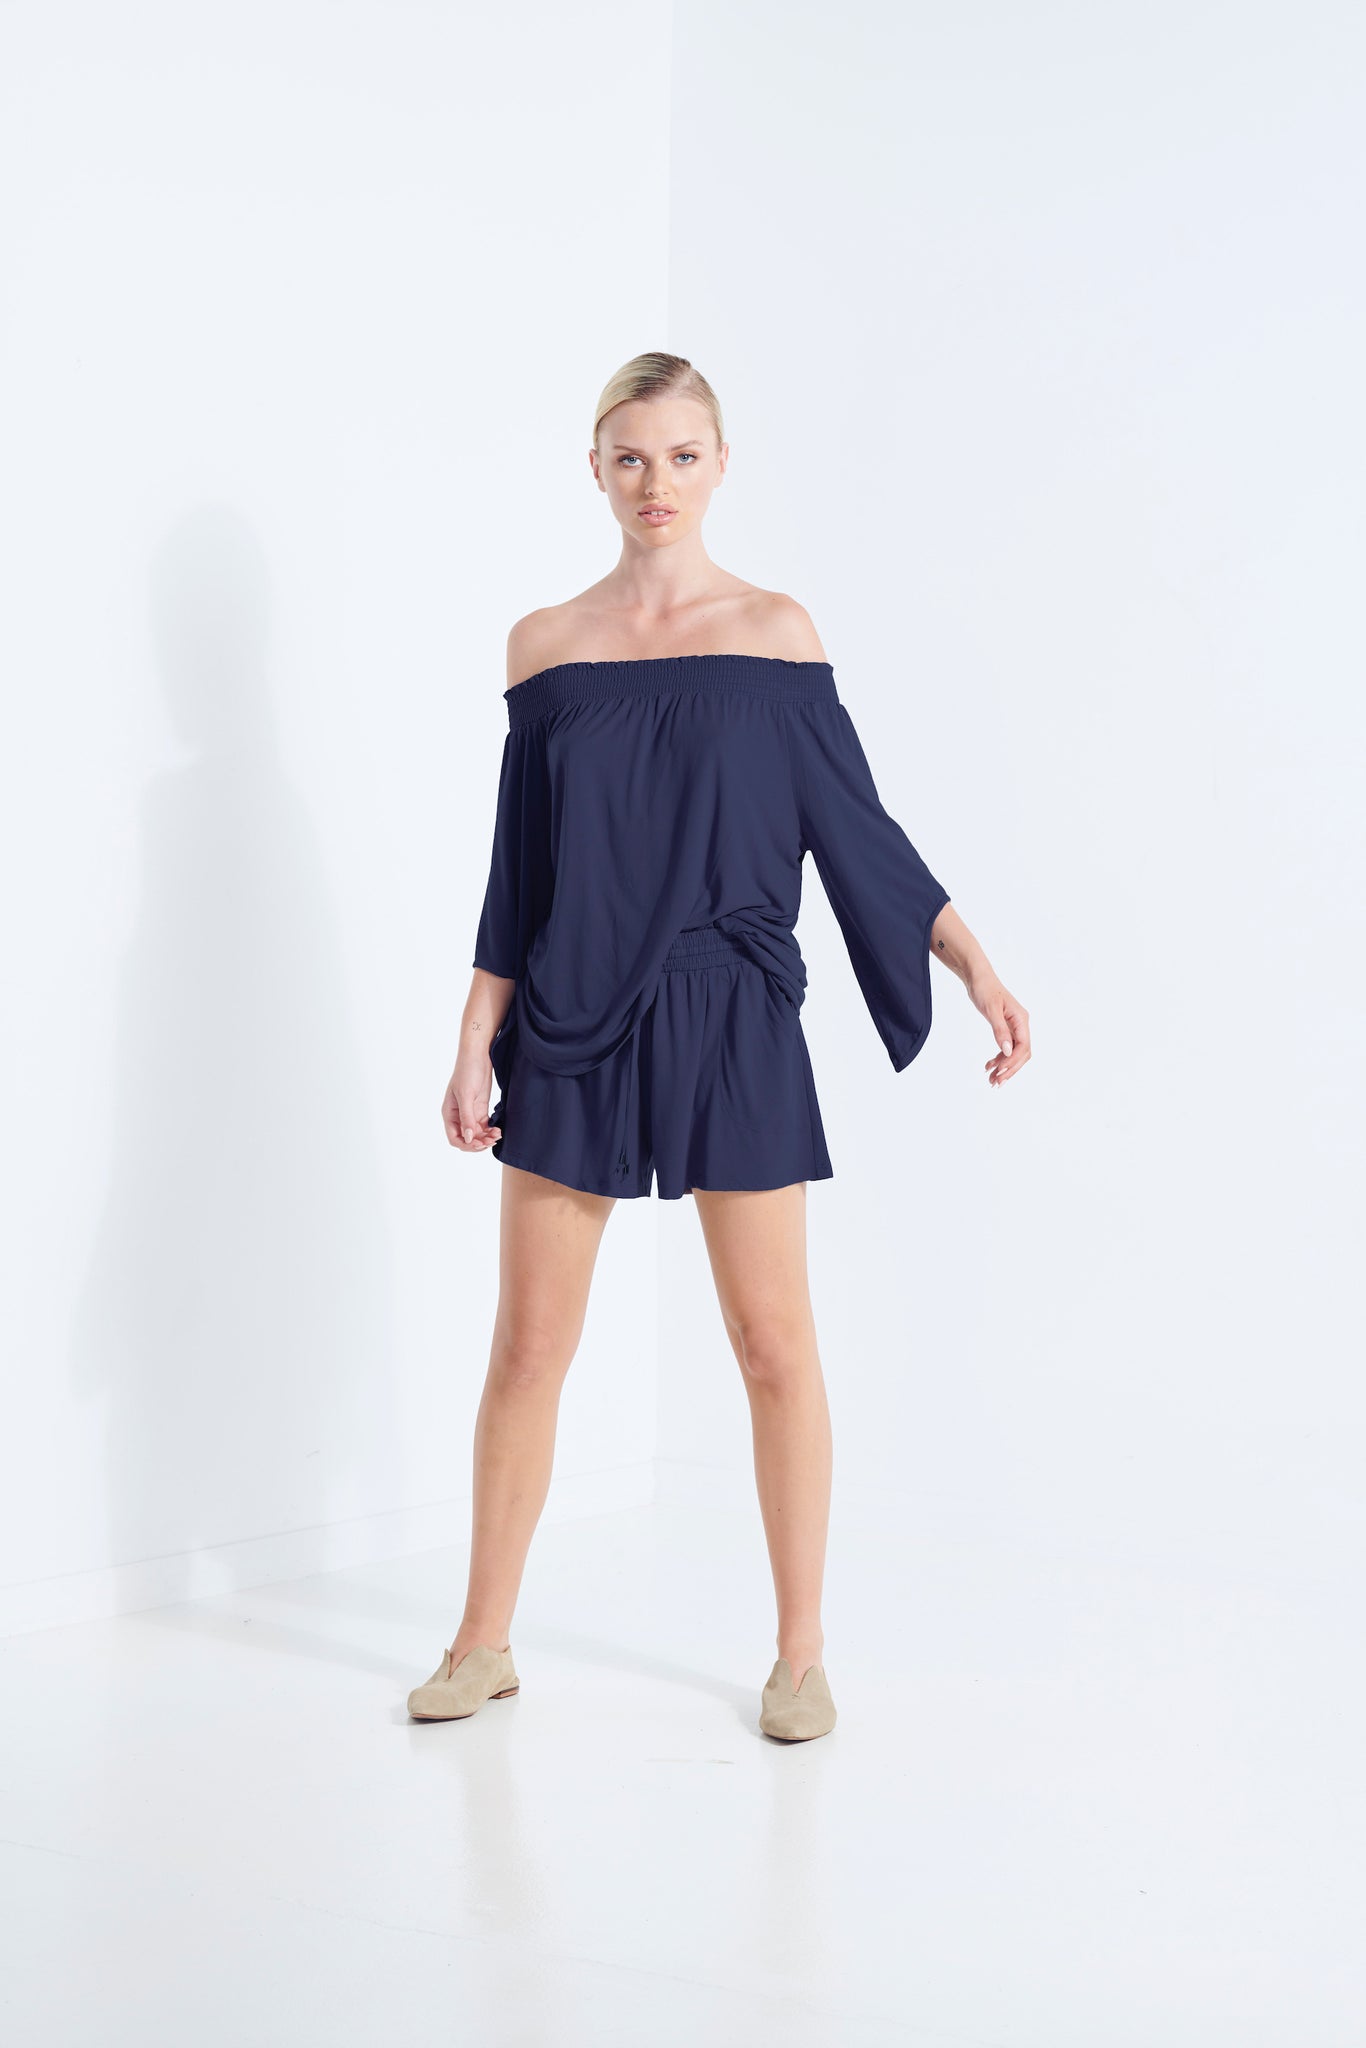 NAEVIA OFF SHOULDER TOP KNIT BEECHWOOD MODAL ELASTIC TOP WITH BELL SLEEVE AEGEAN WASHED NAVY FRONT VIEW